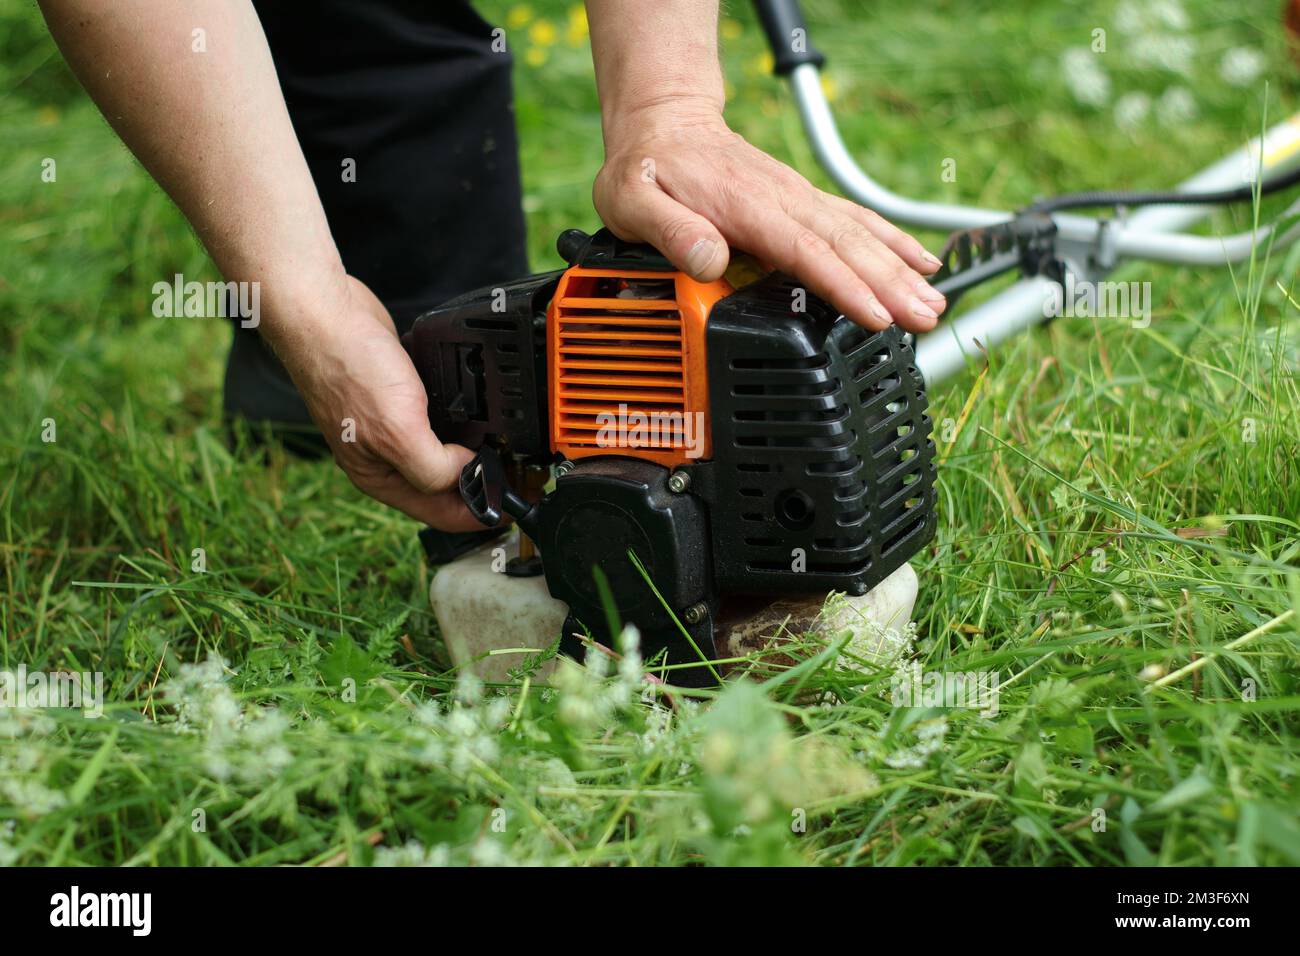 a person fires a petrol brush cutter against the background of a lawn Stock Photo